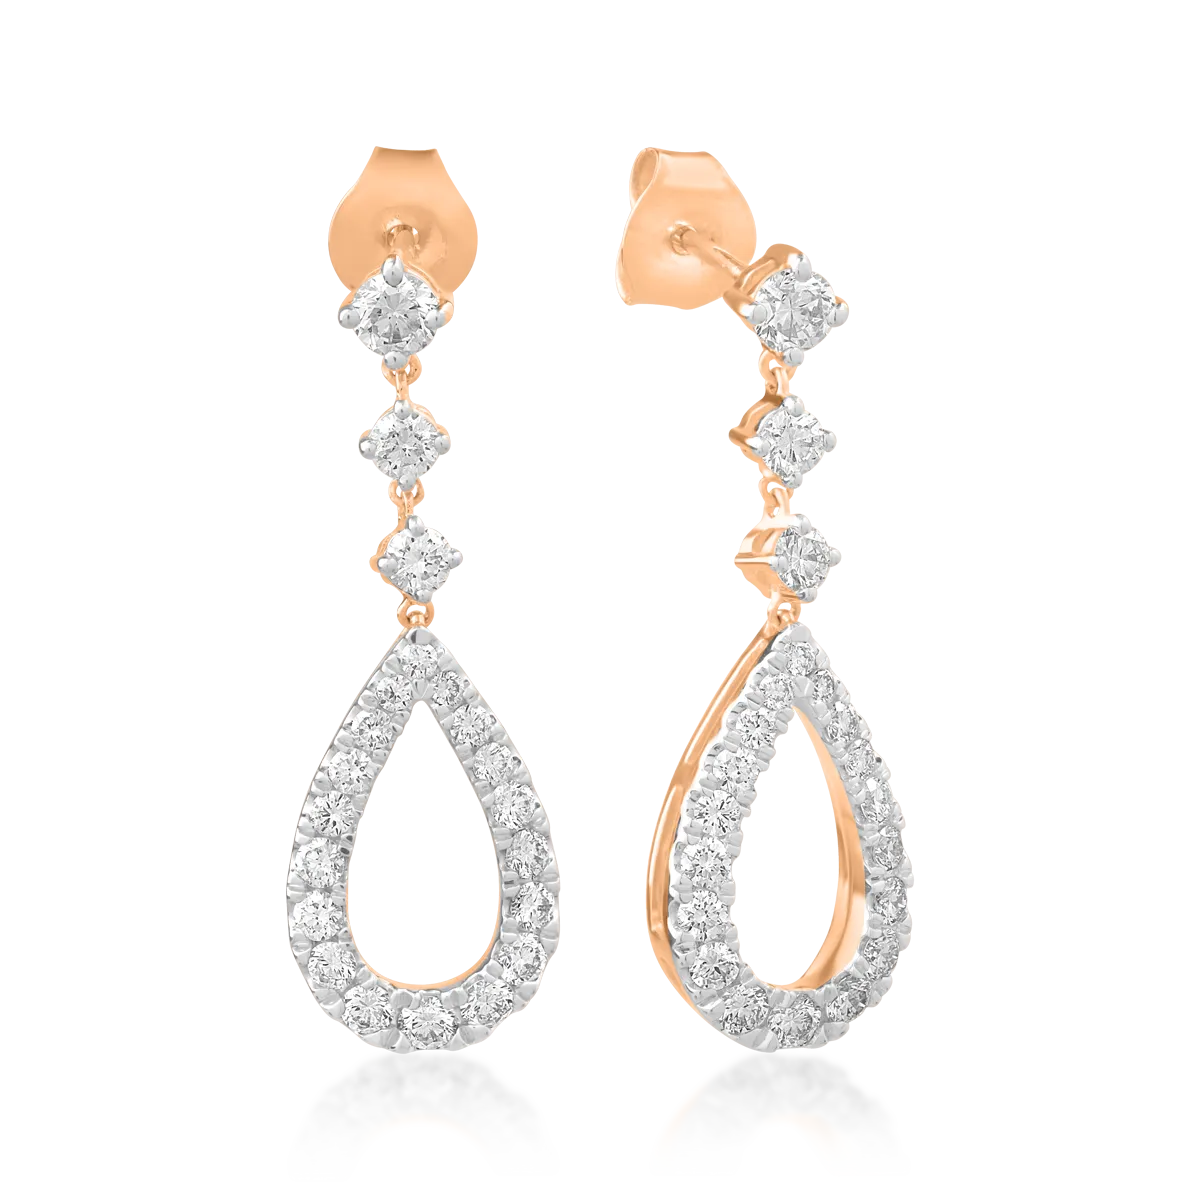 18K rose gold earrings with 0.93ct diamonds